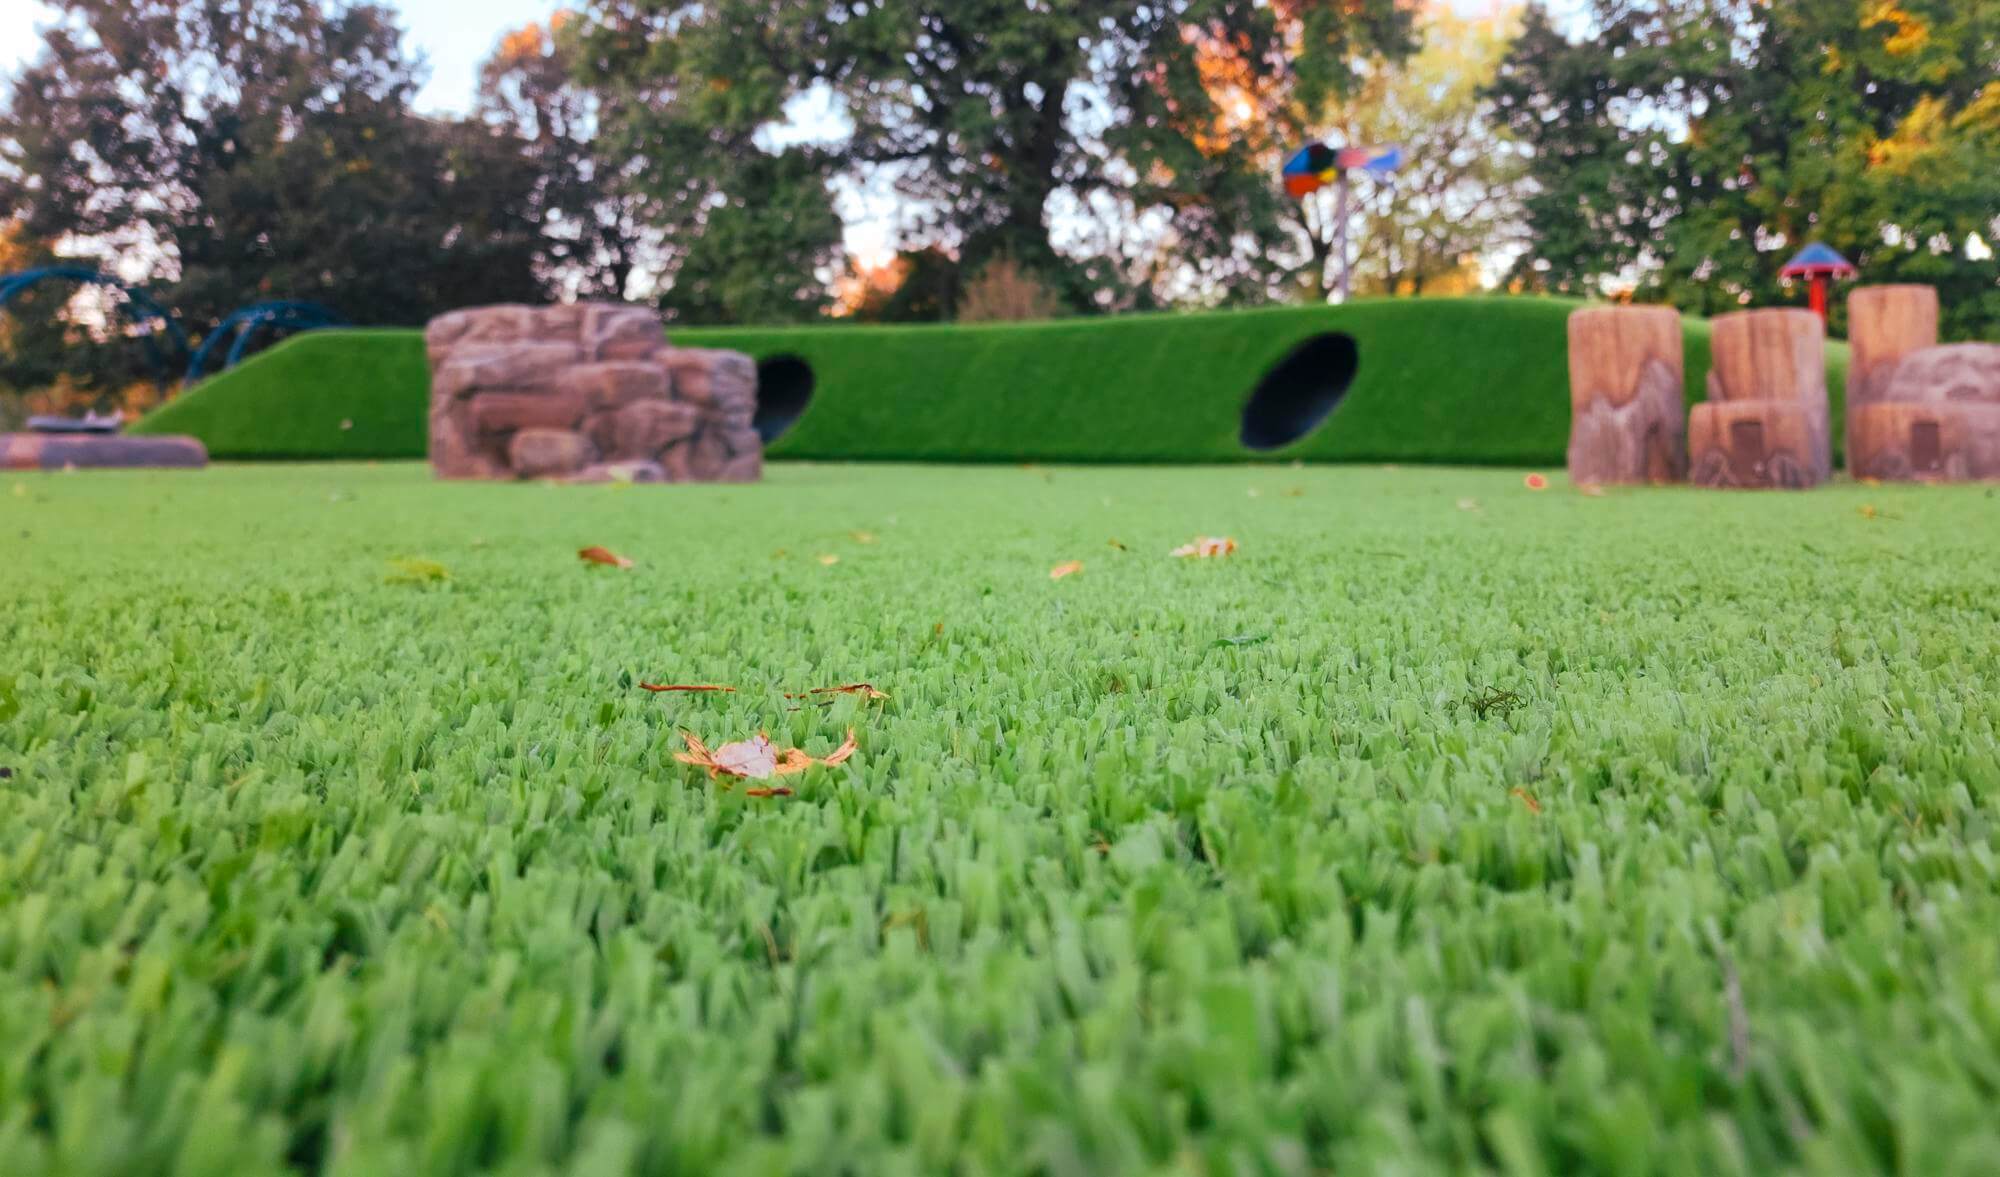 A playground with artificial green turf and scattered leaves, featuring play structures such as tunnels in artificial hills, captured in soft lighting.